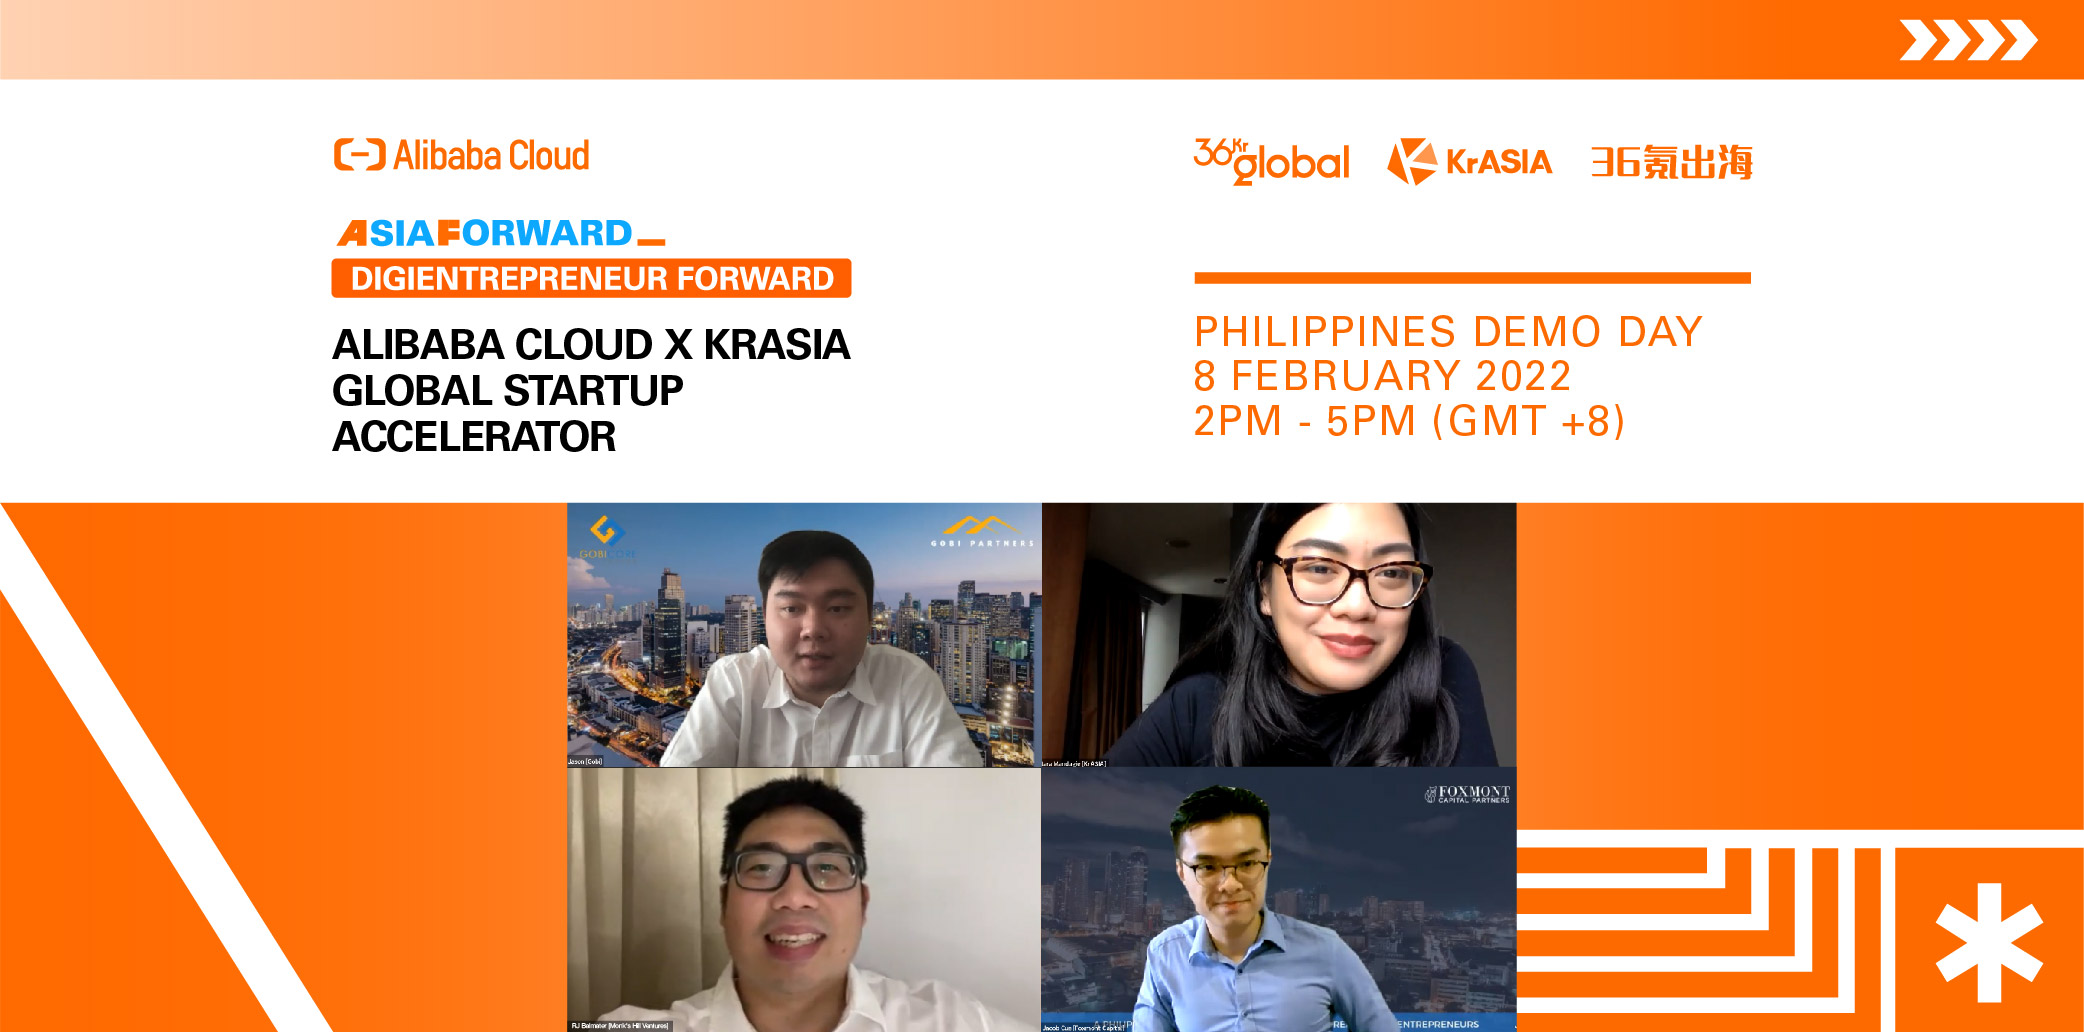 Meet Finantier, the Asia Star of the Alibaba Cloud x KrASIA Global Startup Accelerator Philippines Demo Day